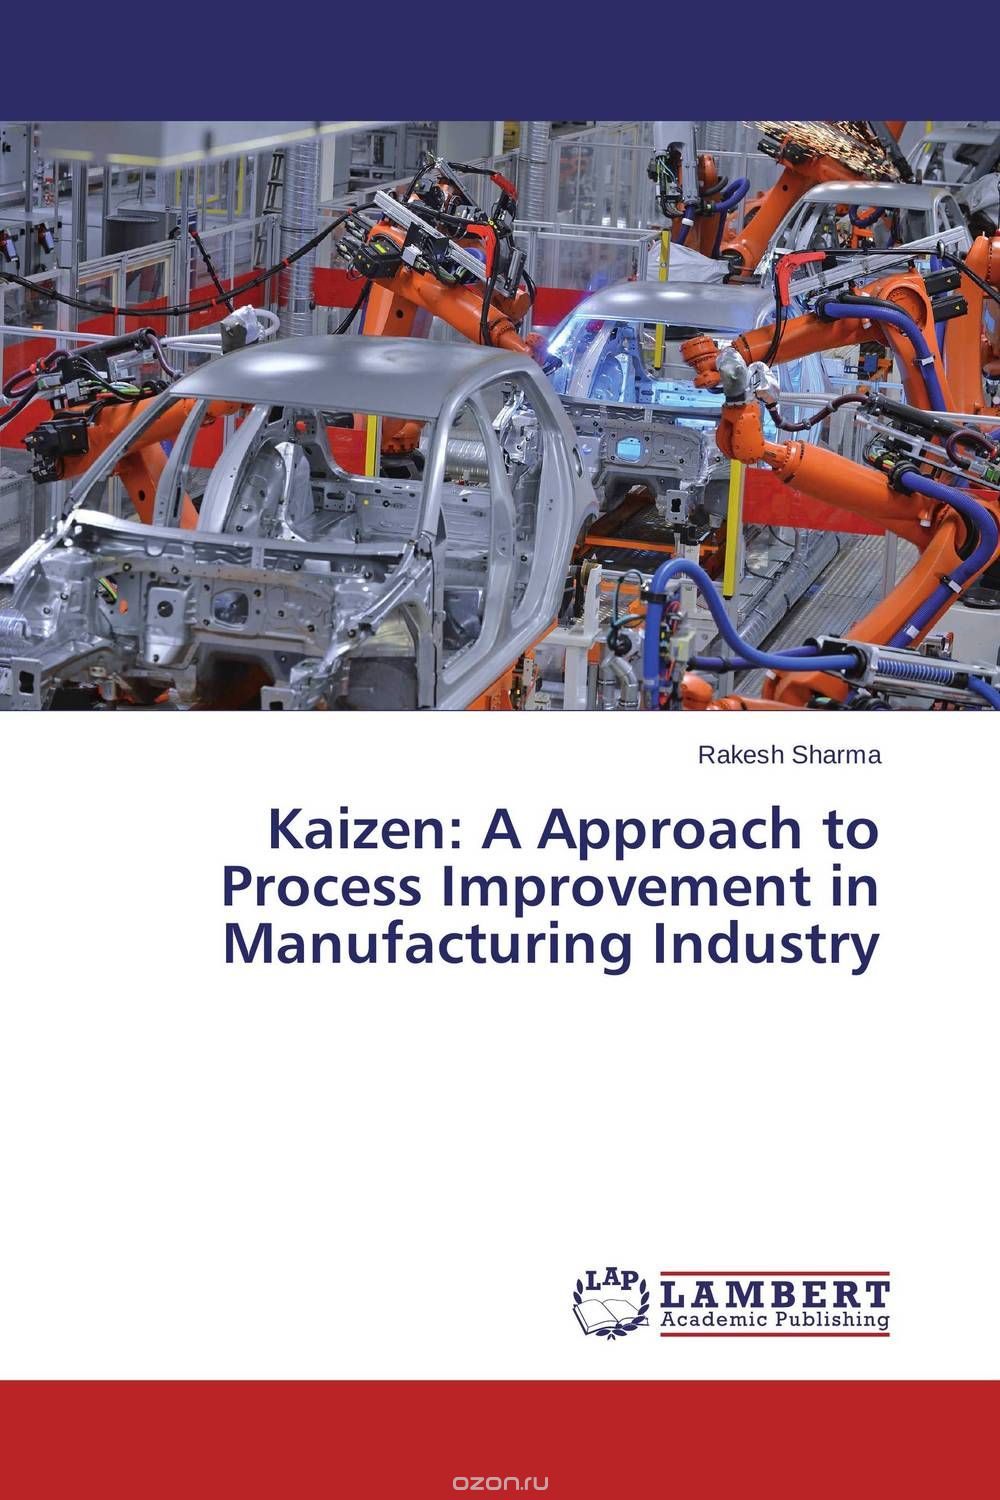 Скачать книгу "Kaizen: A Approach to Process Improvement in Manufacturing Industry"